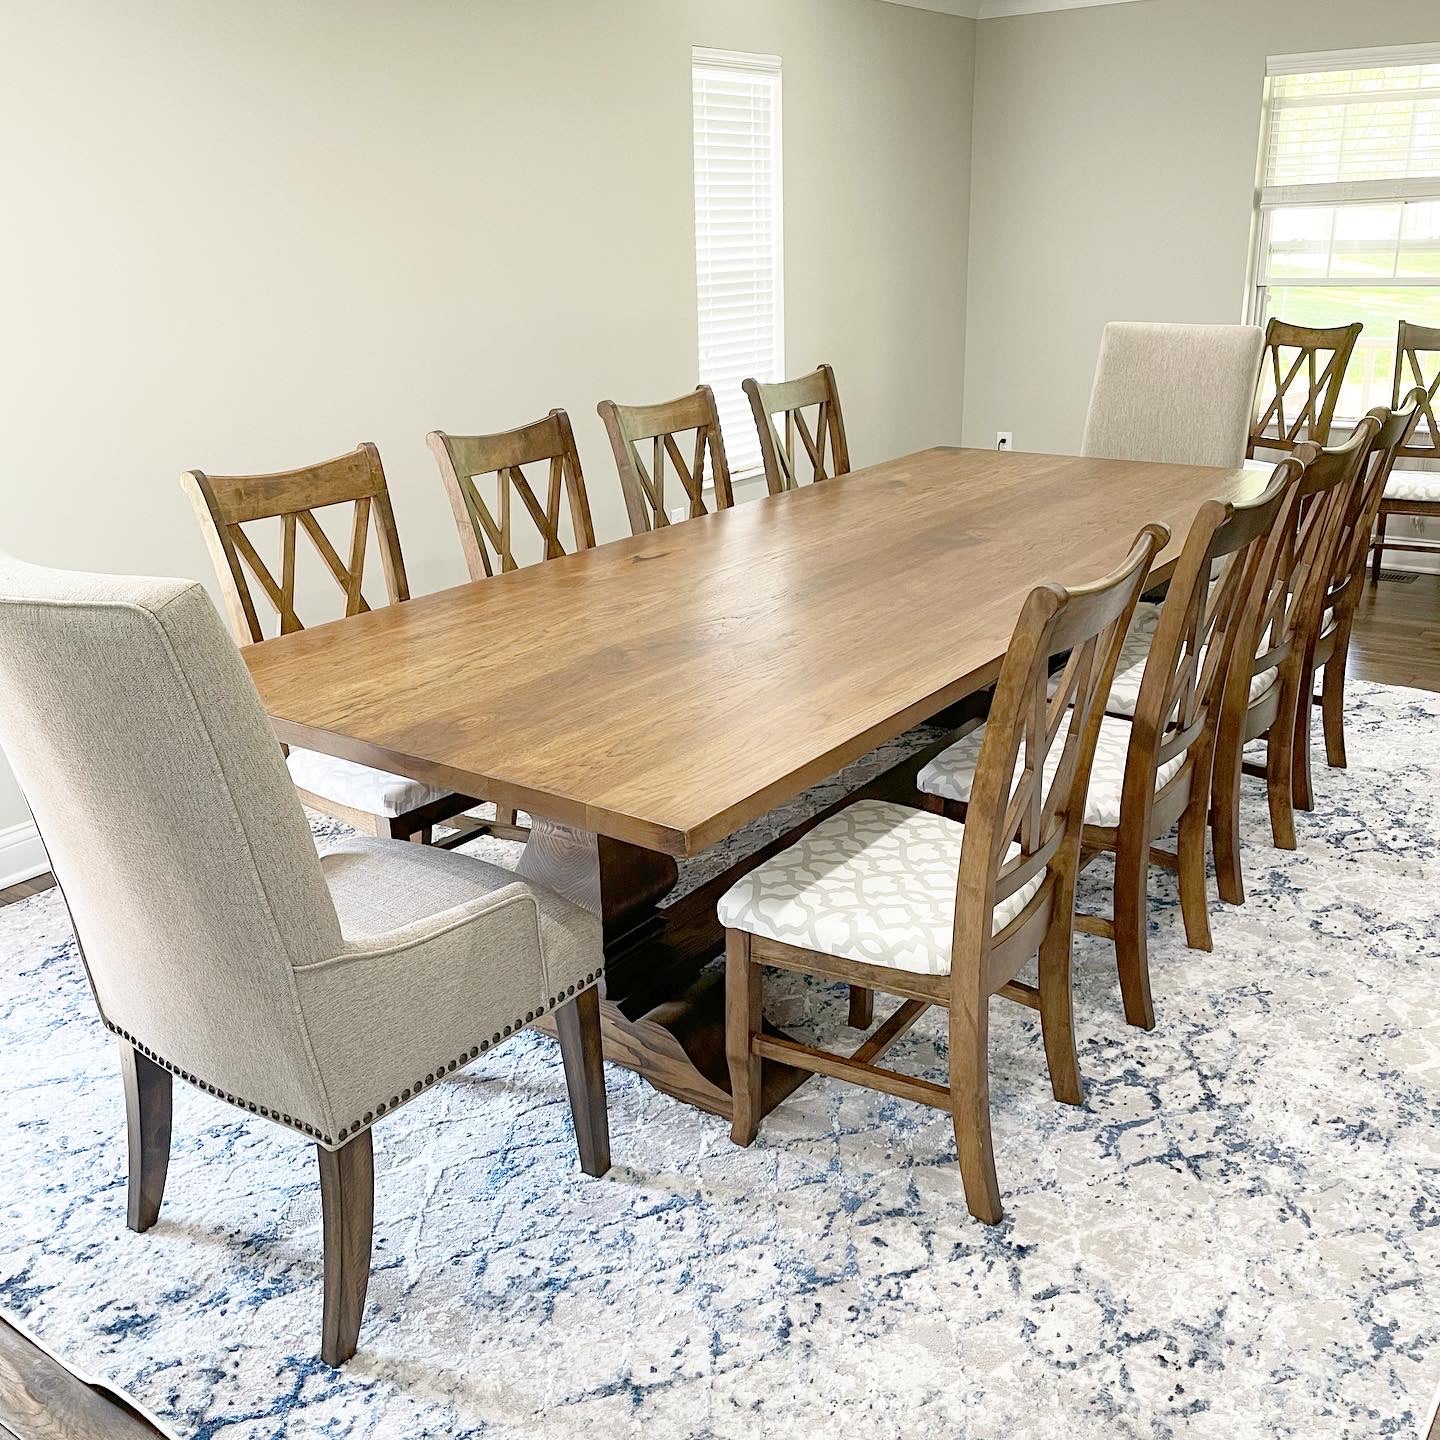 Pictured iwth a 9' L x 48" W Hickory table stained in espresso. Pictured with 8 Double Cross Back Chairs with upholstered seats with fabric provided by clinet.